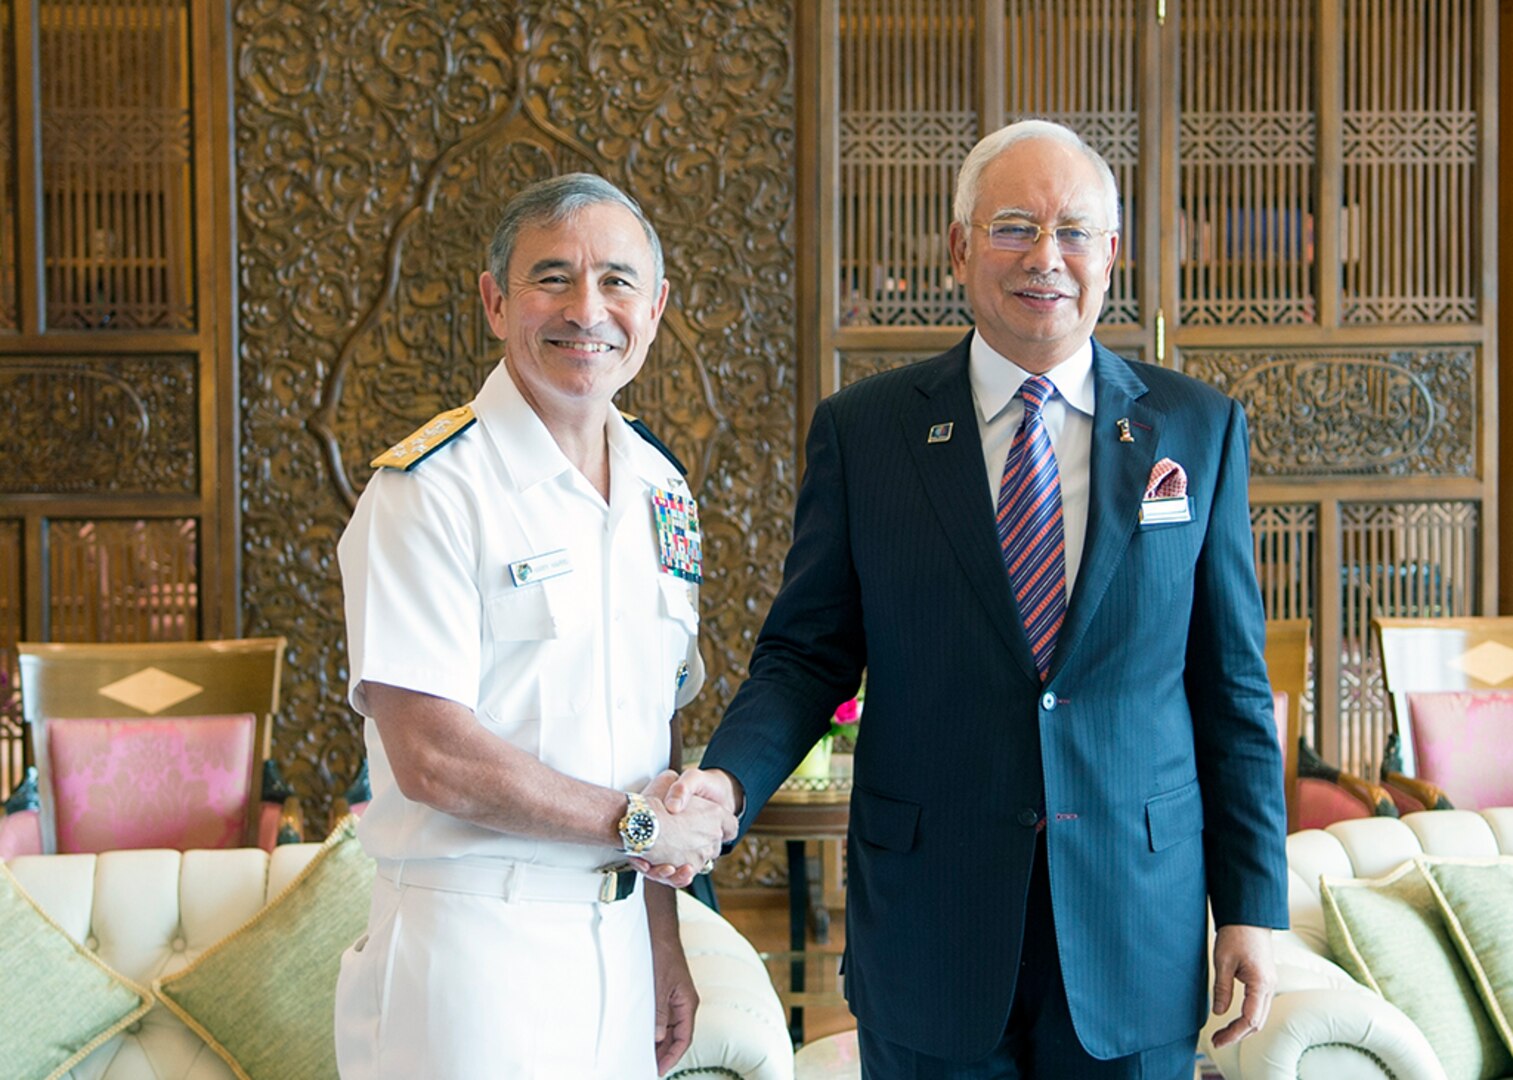 PUTRAJAYA, Malaysia (April 19, 2016) Commander of U.S. Pacific Command, Adm. Harry B. Harris Jr. met with the Prime Minister of Malaysia, Najib Razak during his visit to Malaysia to attend the Putrajaya Forum 2016.  This forum is organized by the Malaysian Institute of Defence and Security, and brings together senior leaders and professionals of academia to discuss defense and security issues in the Indo-Asia-Pacific. 

